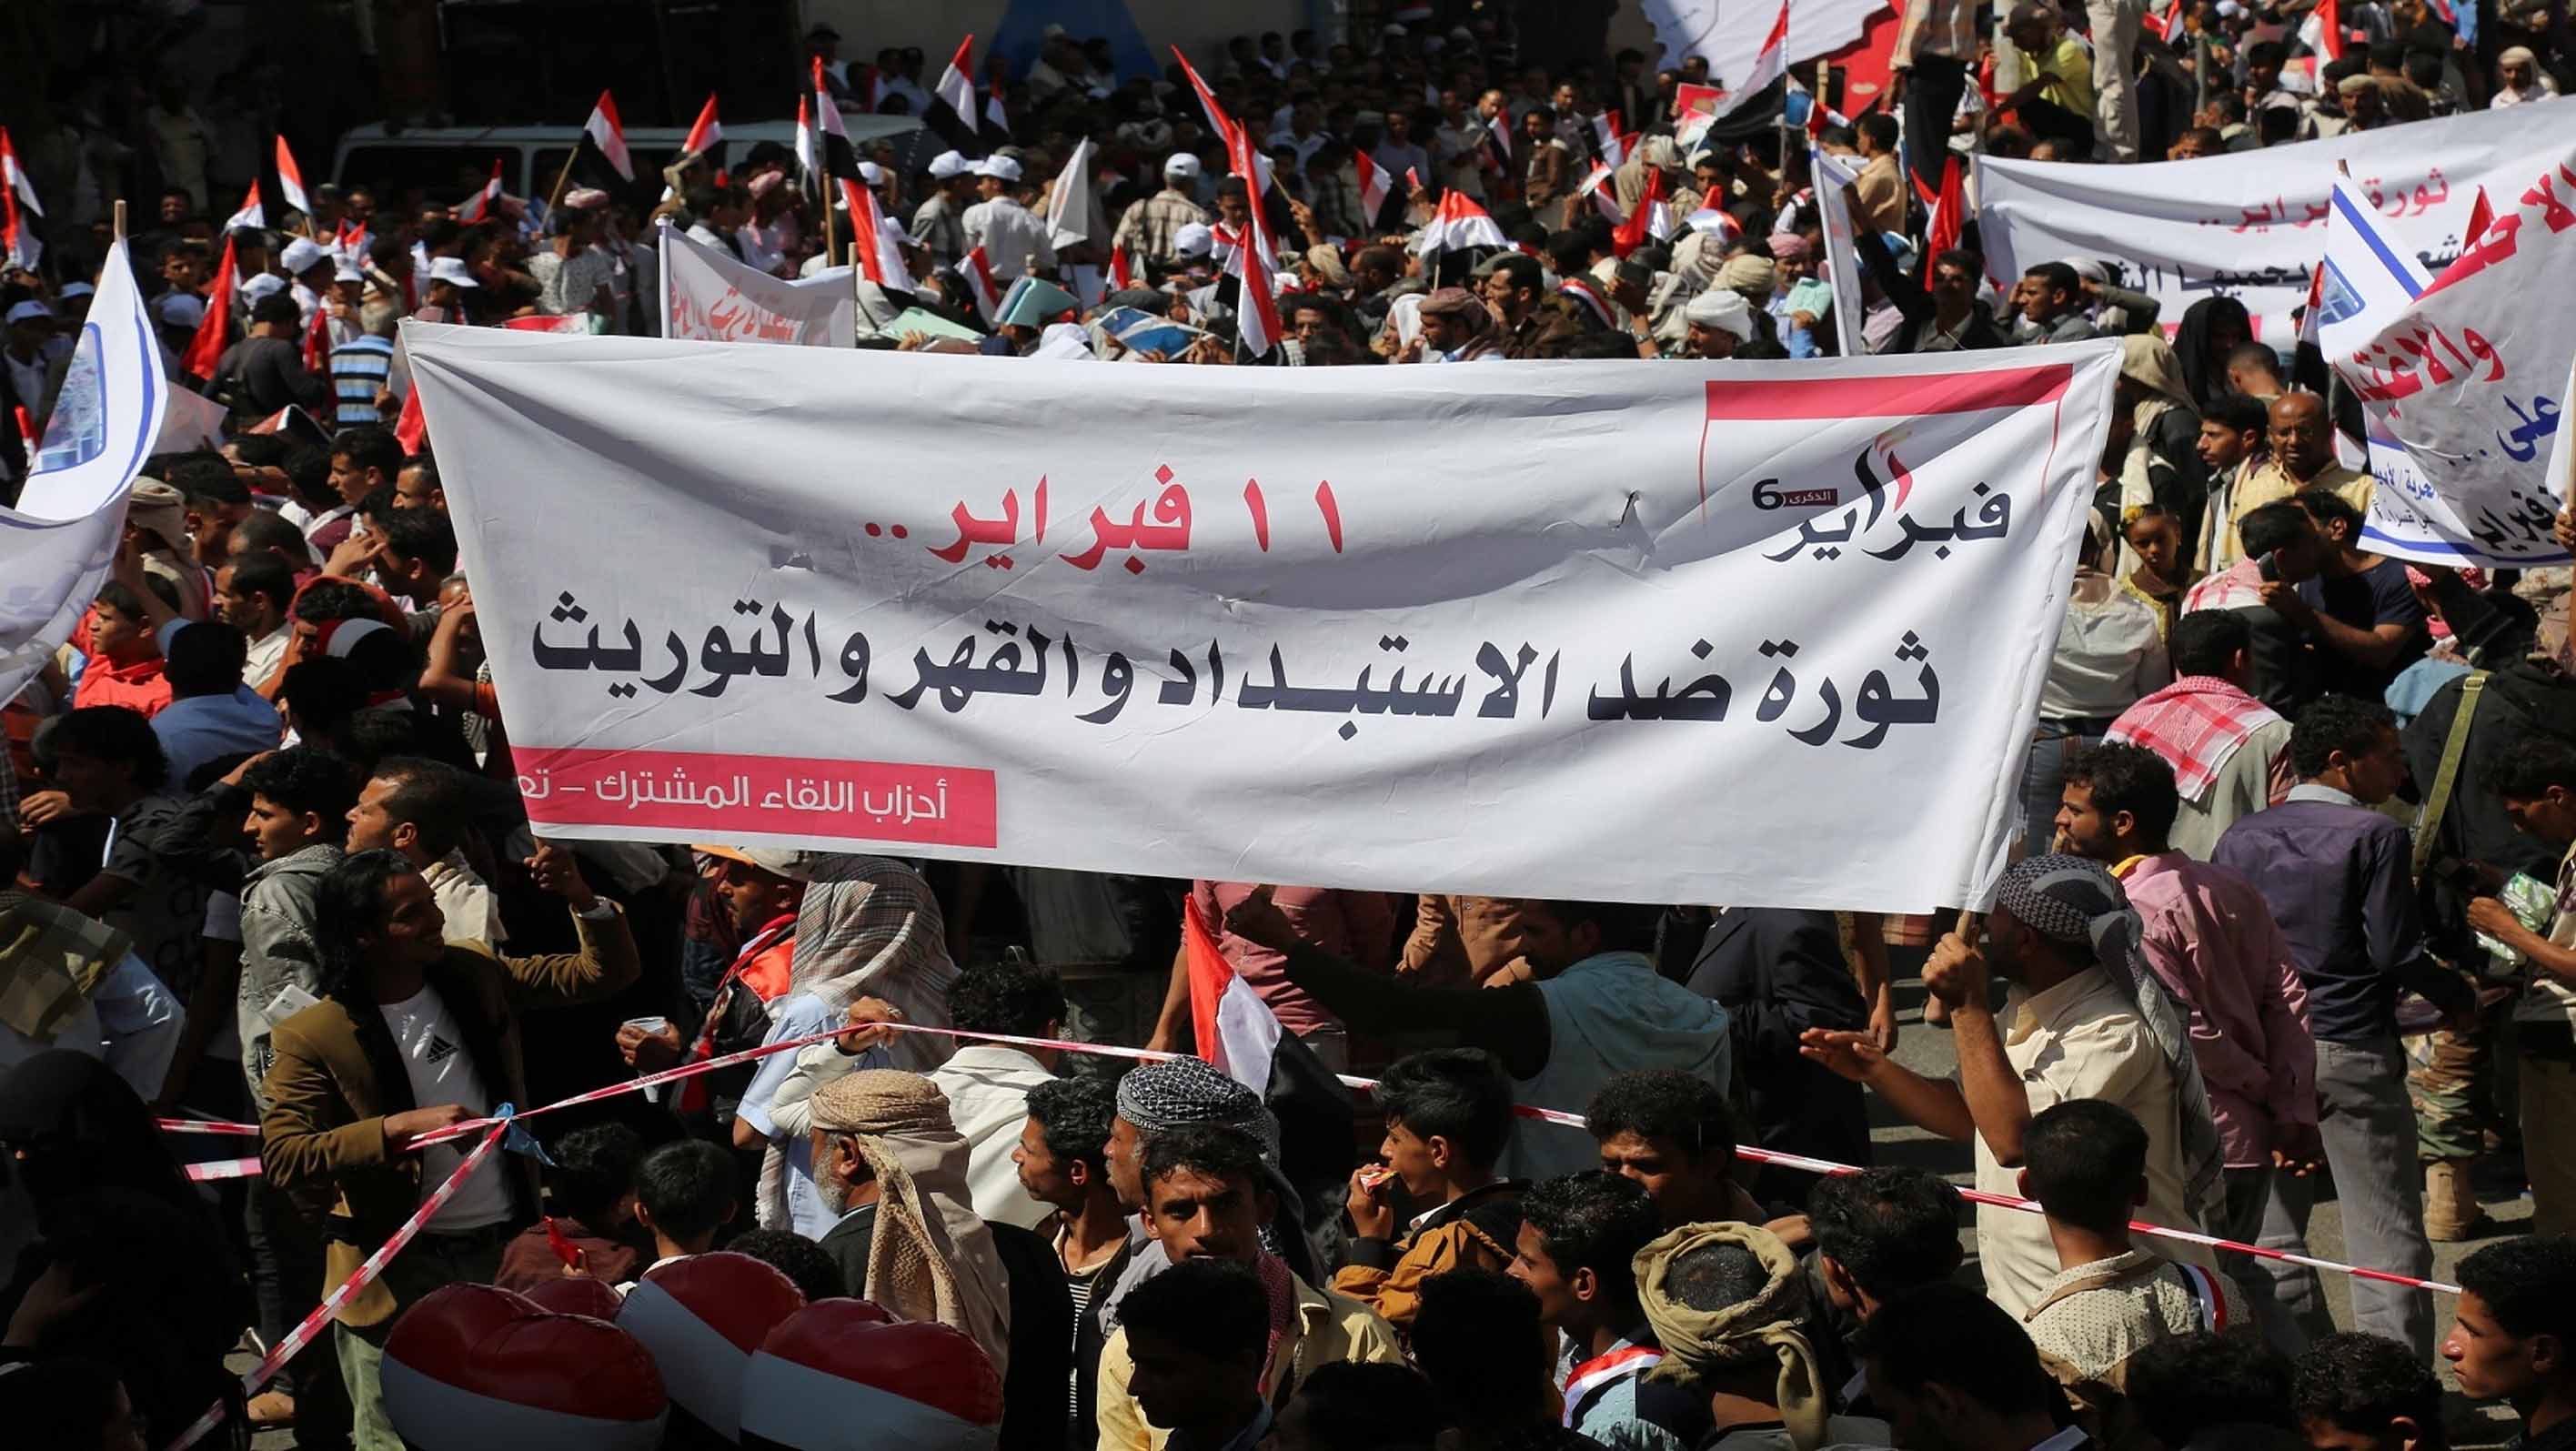 Counter-revolution brings war, hunger and death to Yemen, Mrs. Karman says